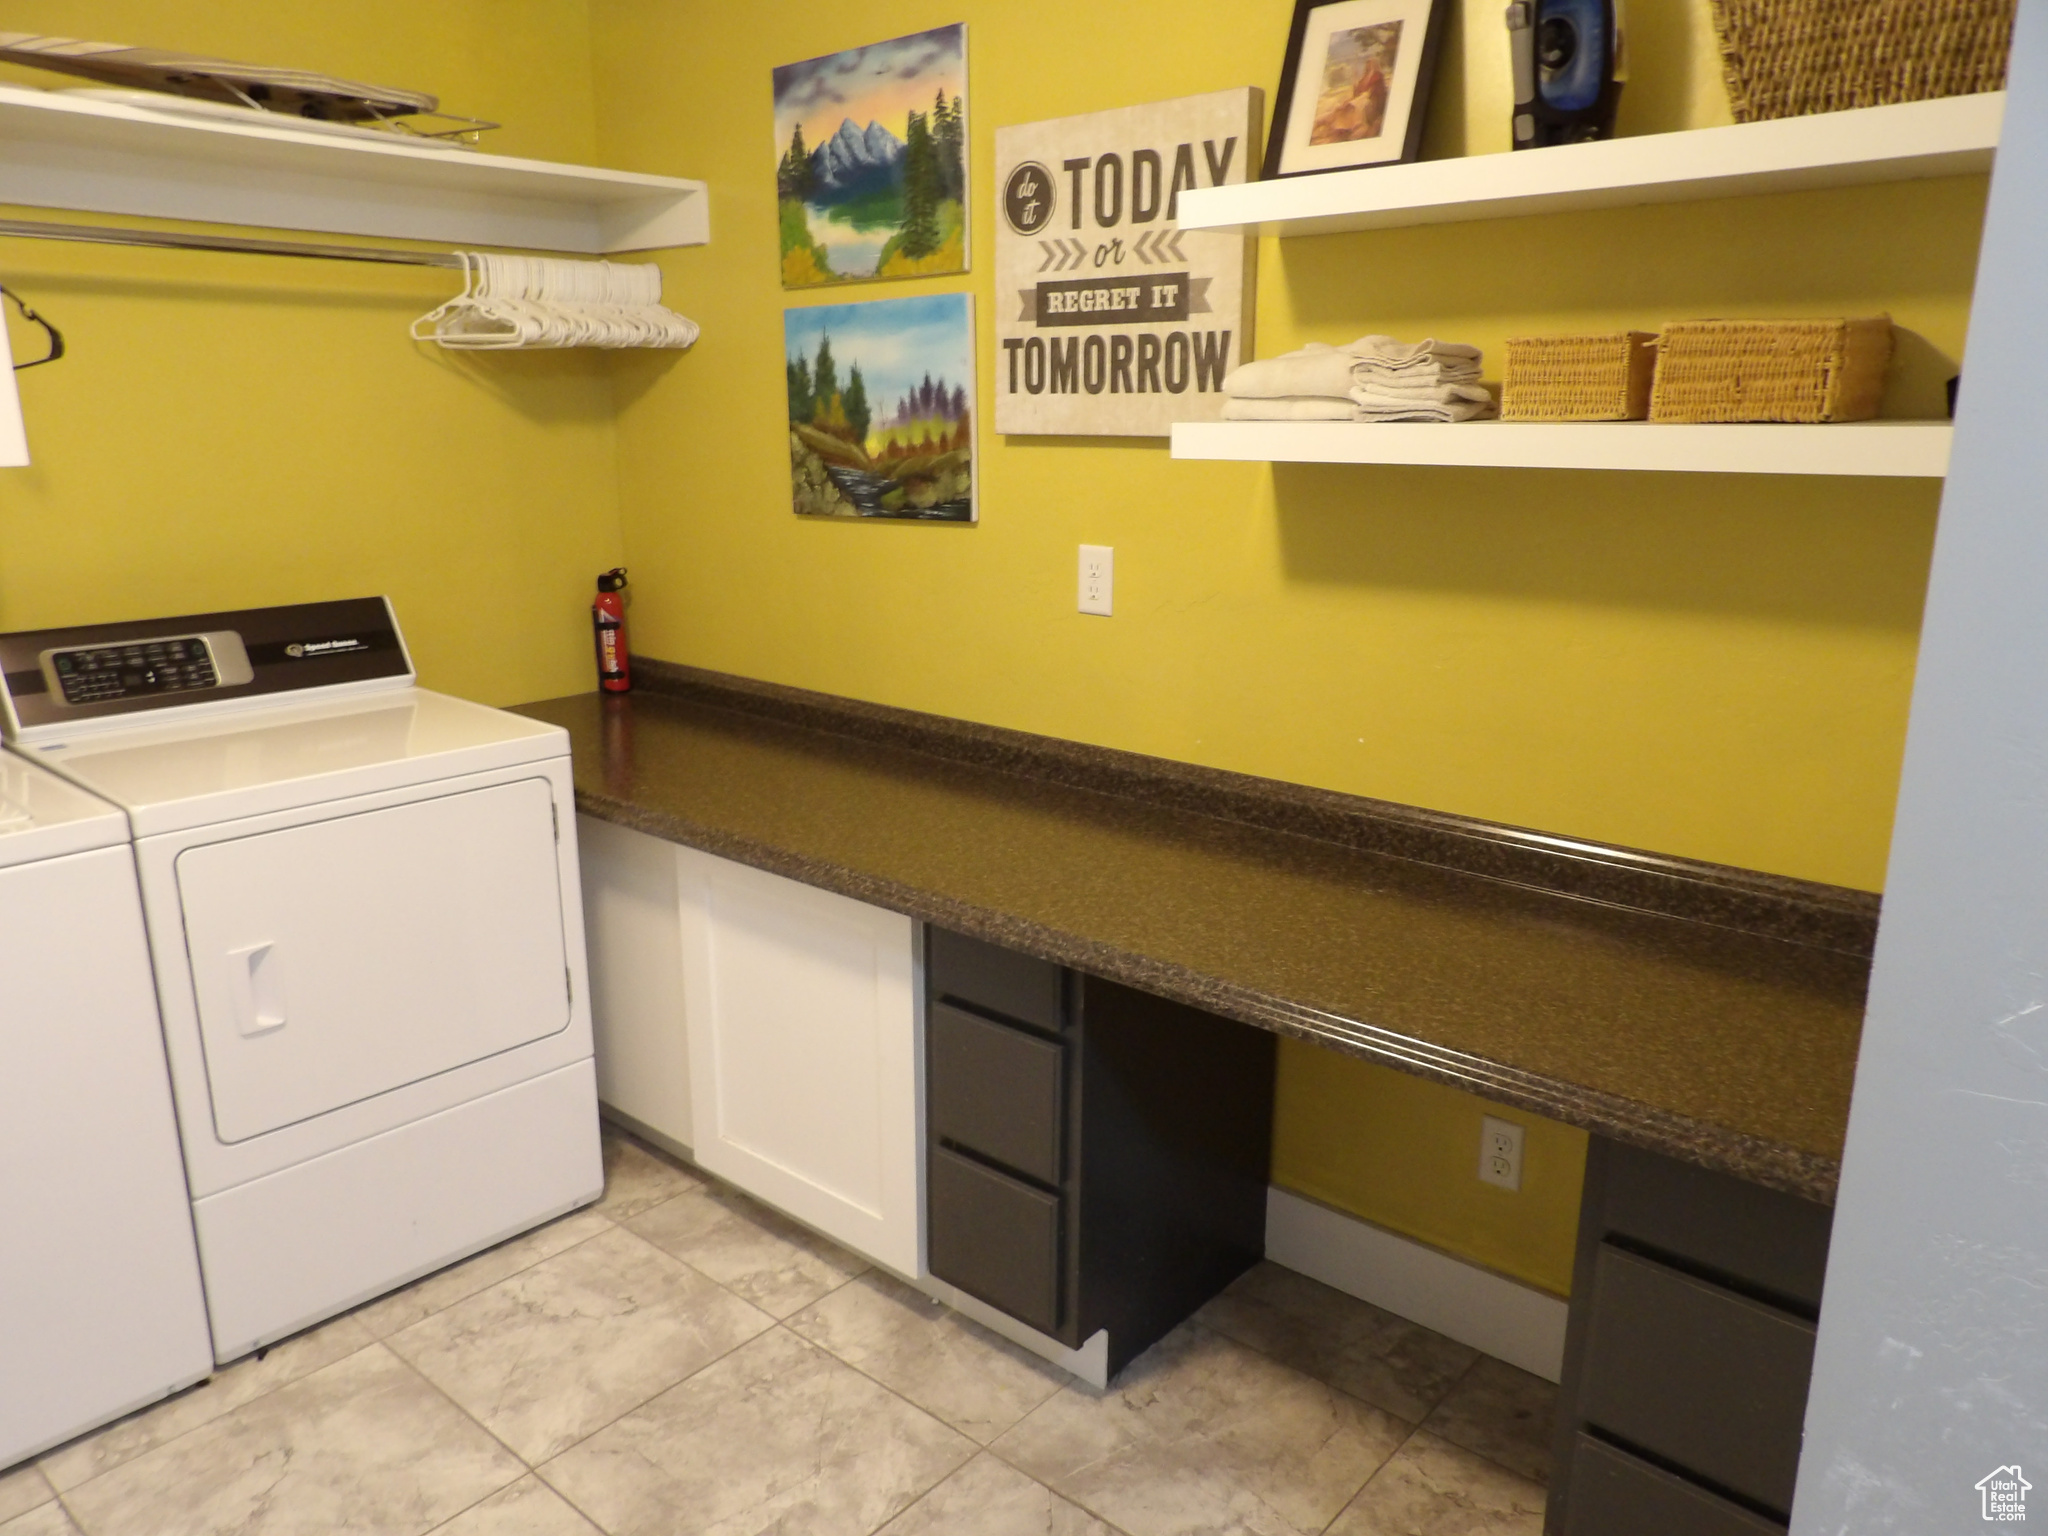 Laundry area featuring light tile flooring and washer and dryer